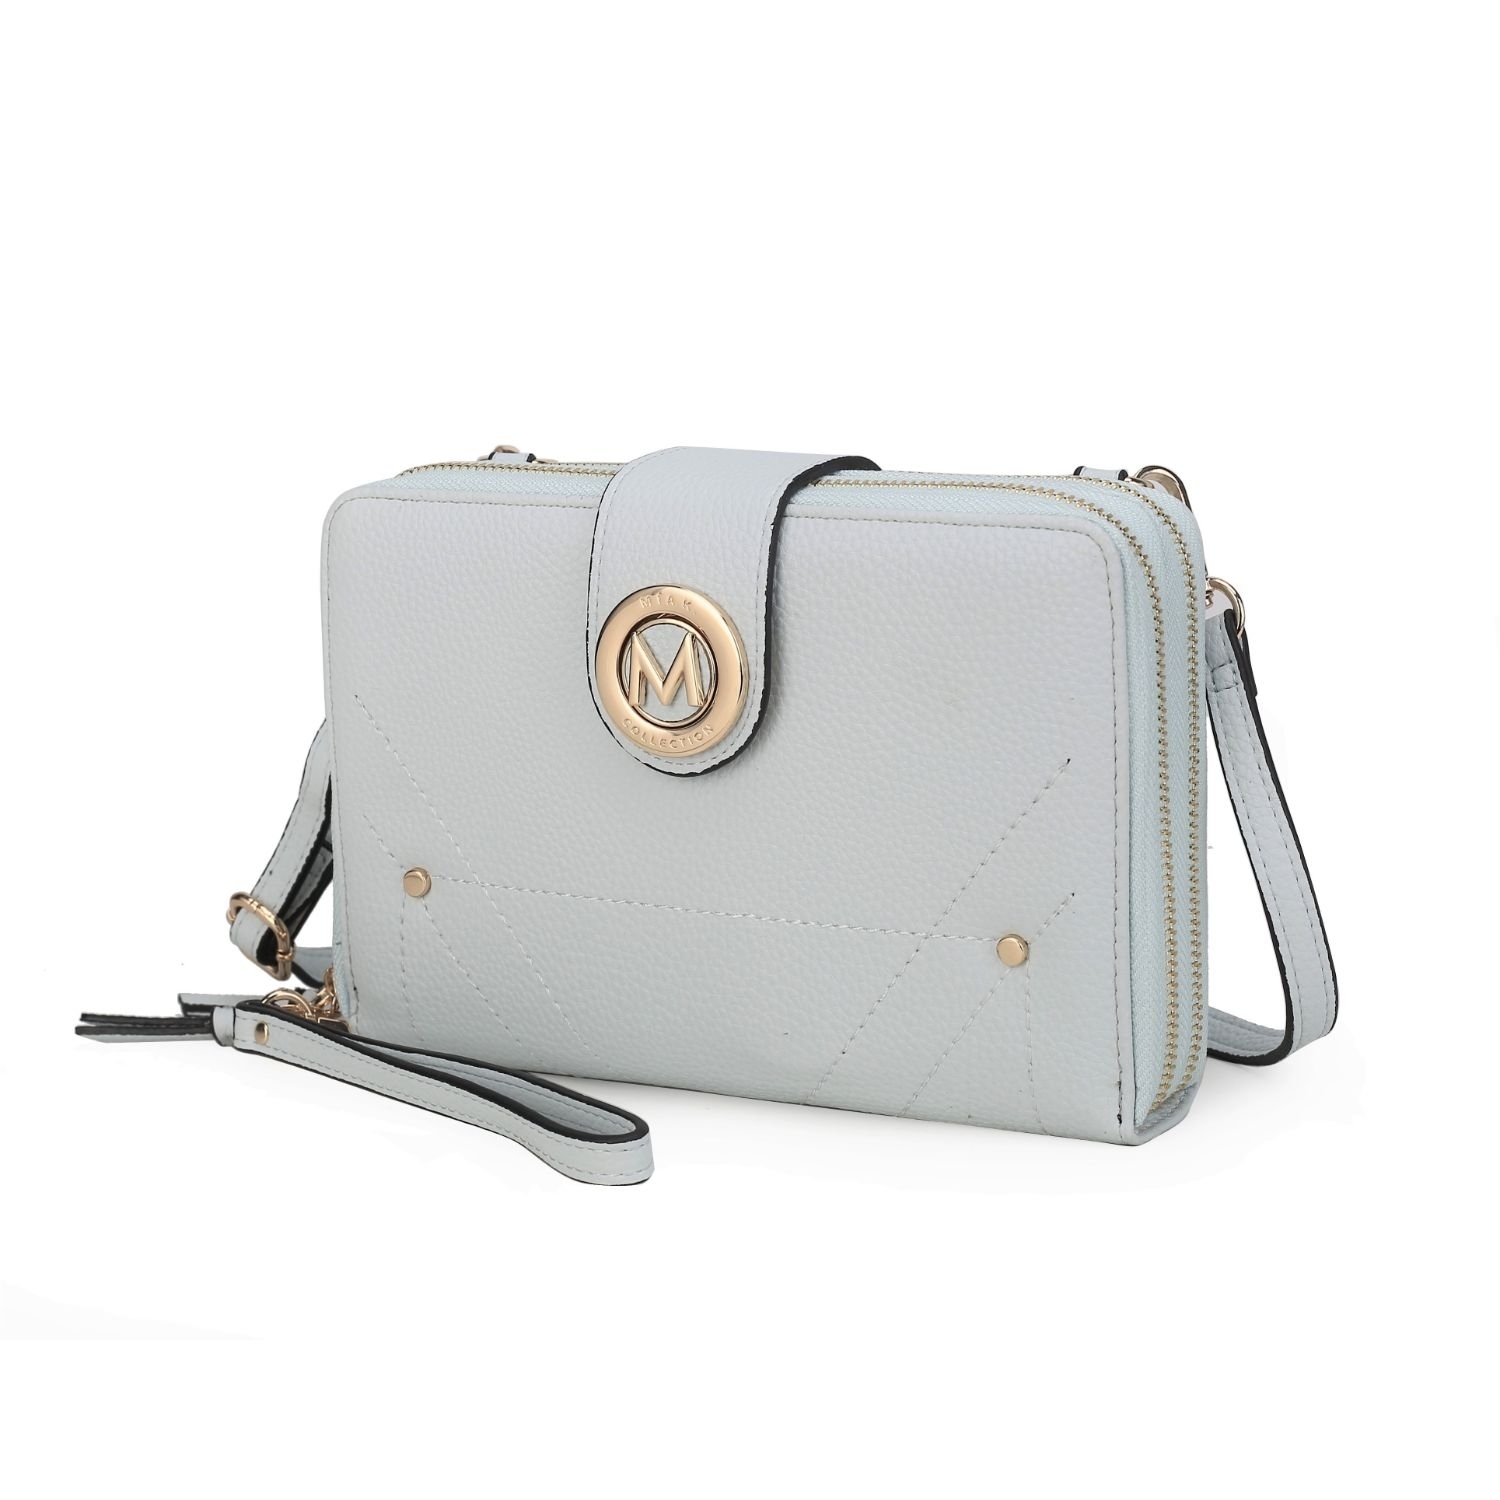 MKF Collection Sage Cell-phone - Wallet Crossbody Handbag With Optional Wristlet By Mia K - Blush